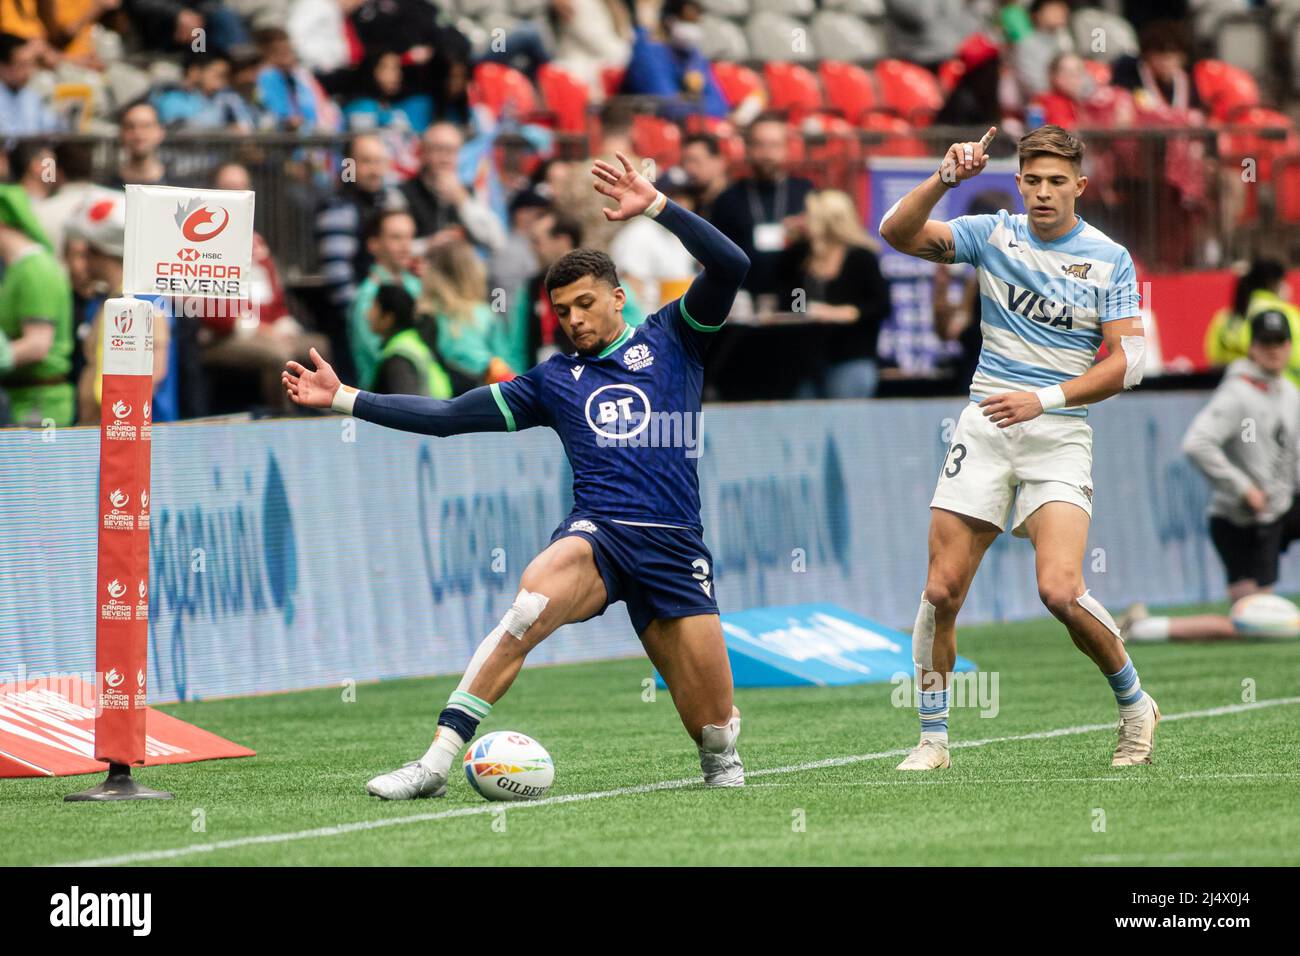 Vancouver, Canada, April 16, 2022: Jacob Henry (left) of Team Scotland 7s tries to keep the ball in play during the match against Team Argentina 7s on Day 1 of the HSBC Canada Sevens at BC Place in Vancouver, Canada. Argentina won the match with the score 24-5. Stock Photo